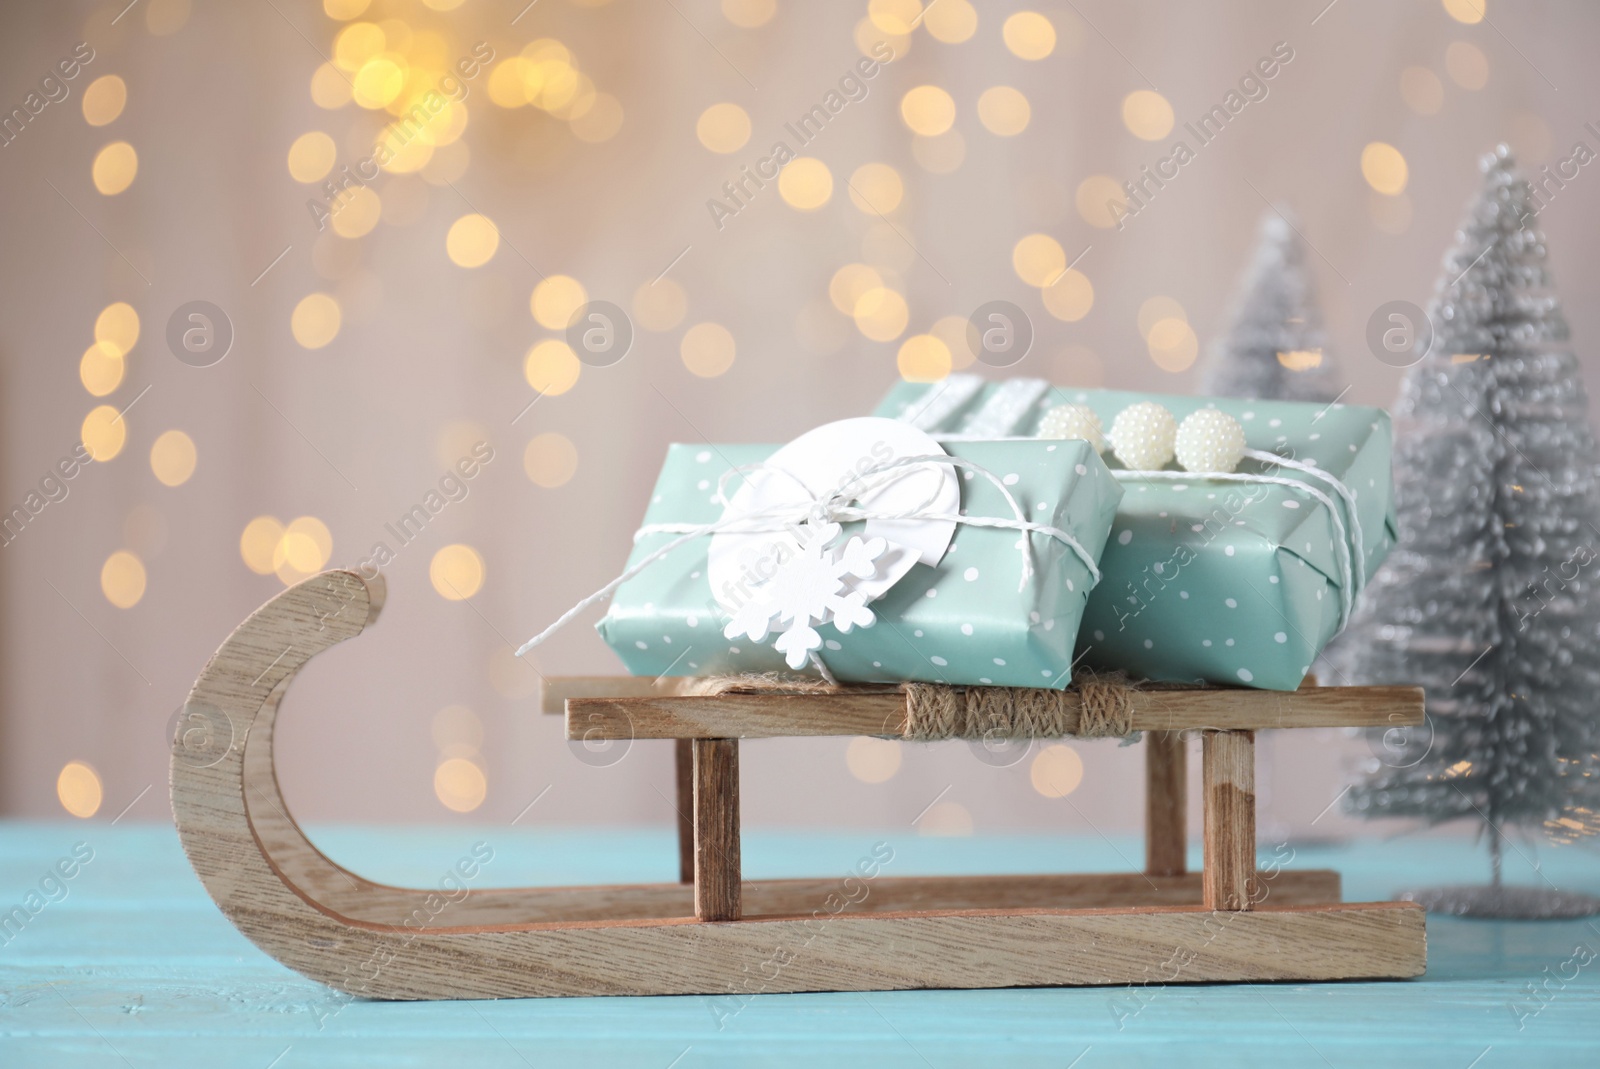 Photo of Sleigh with gift boxes on turquoise wooden table against blurred lights